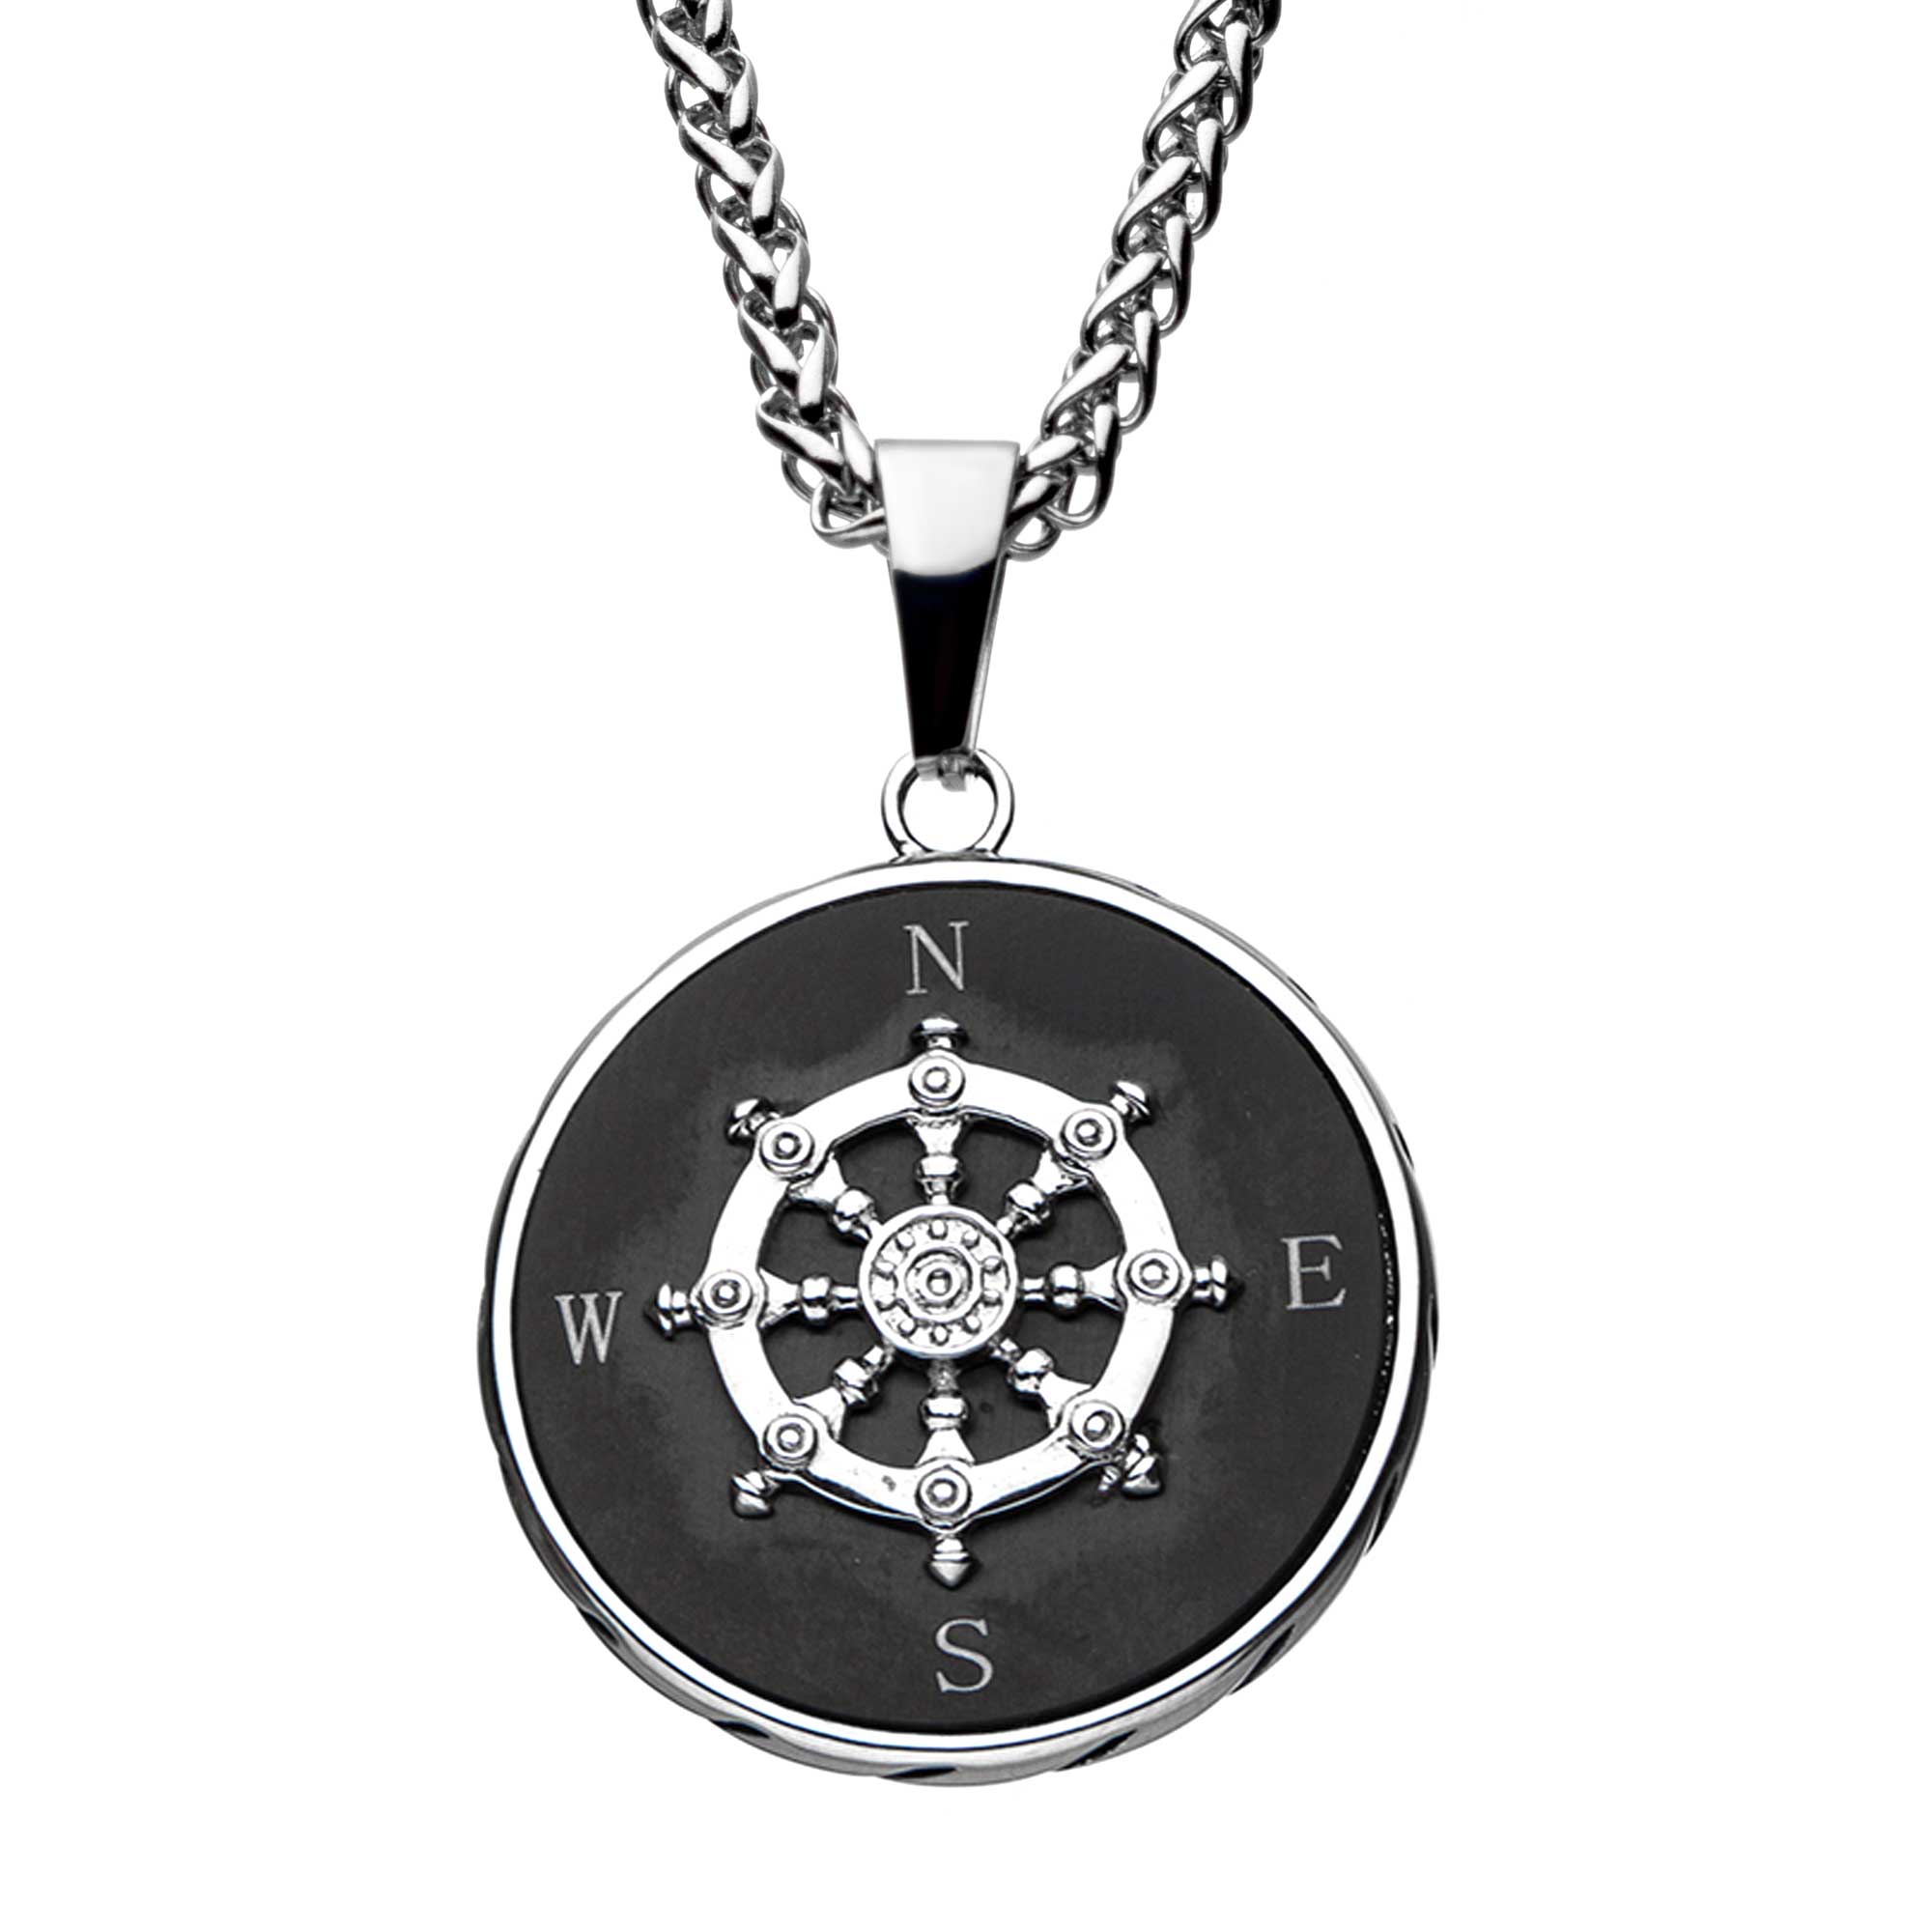 Stainless Steel Black Plated Ship's Wheel Compass Pendant with Chain Ritzi Jewelers Brookville, IN